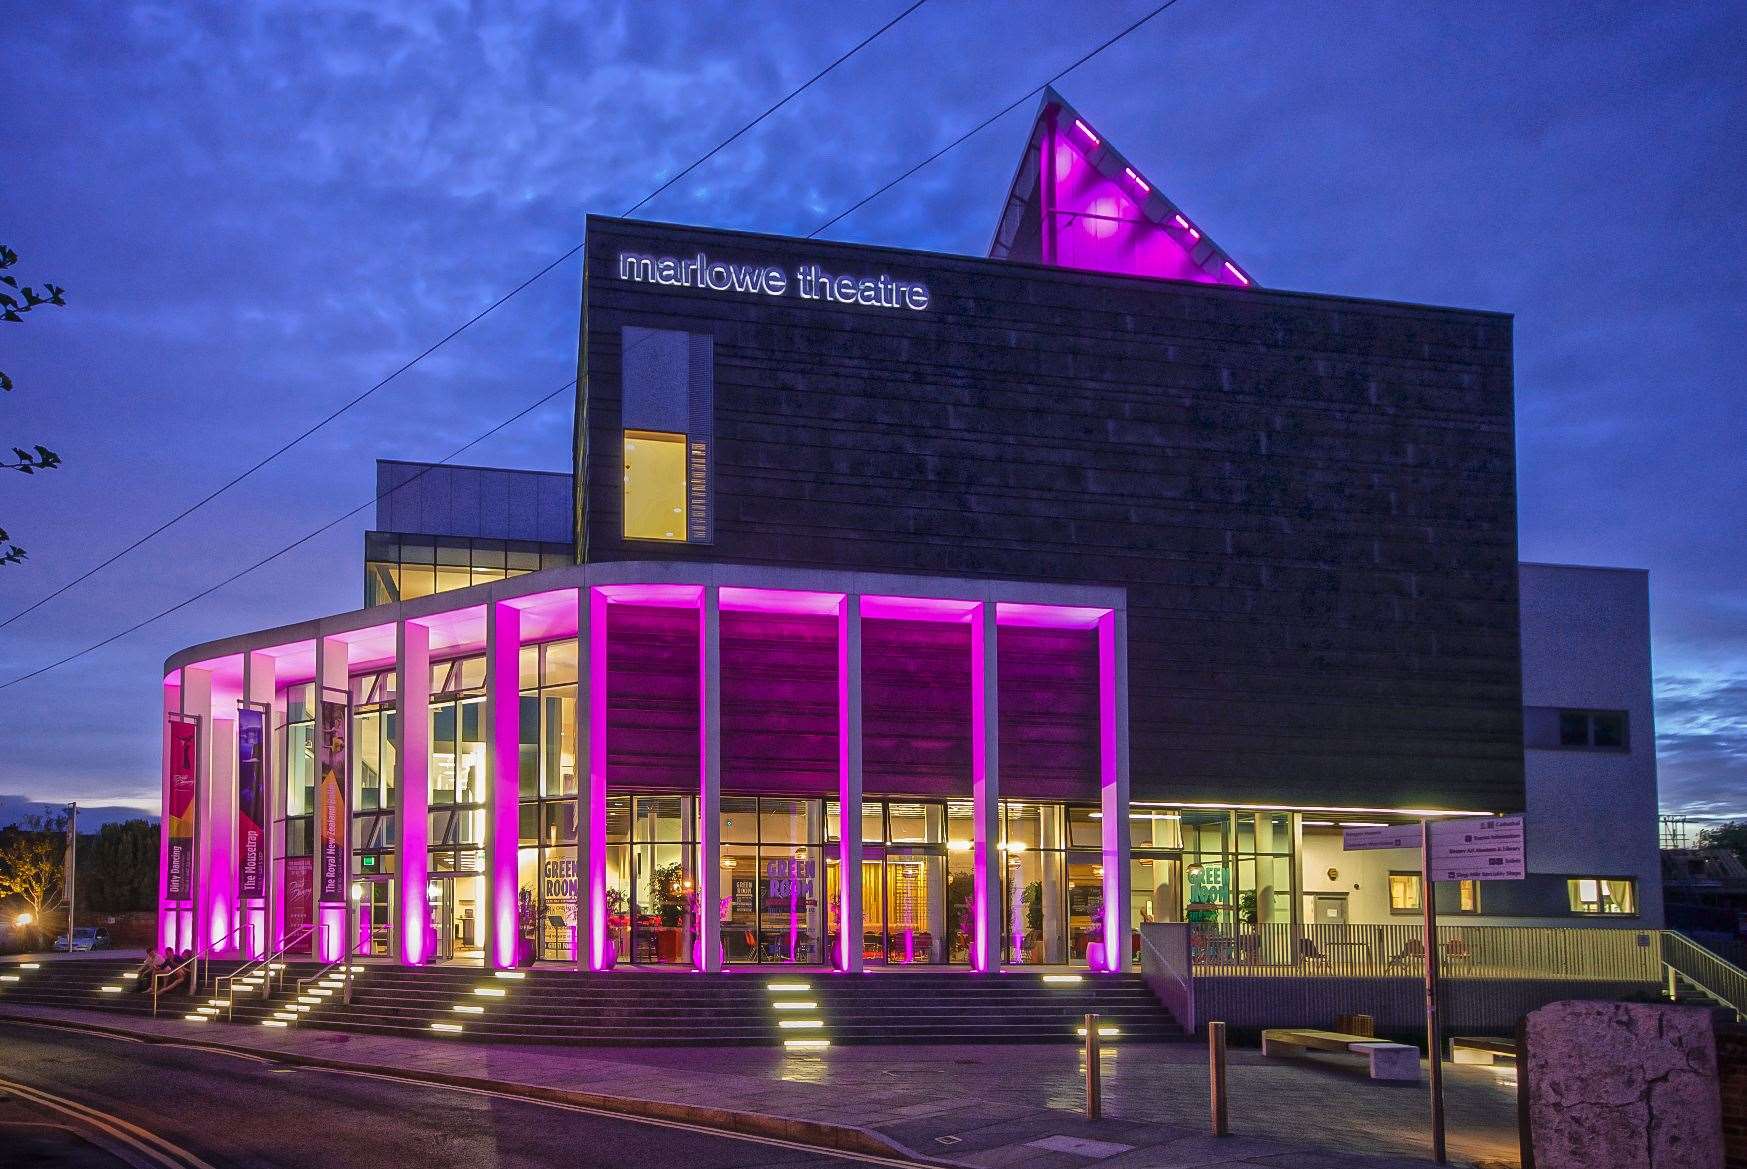 The Marlowe Theatre in Canterbury are receiving £3million in government funding